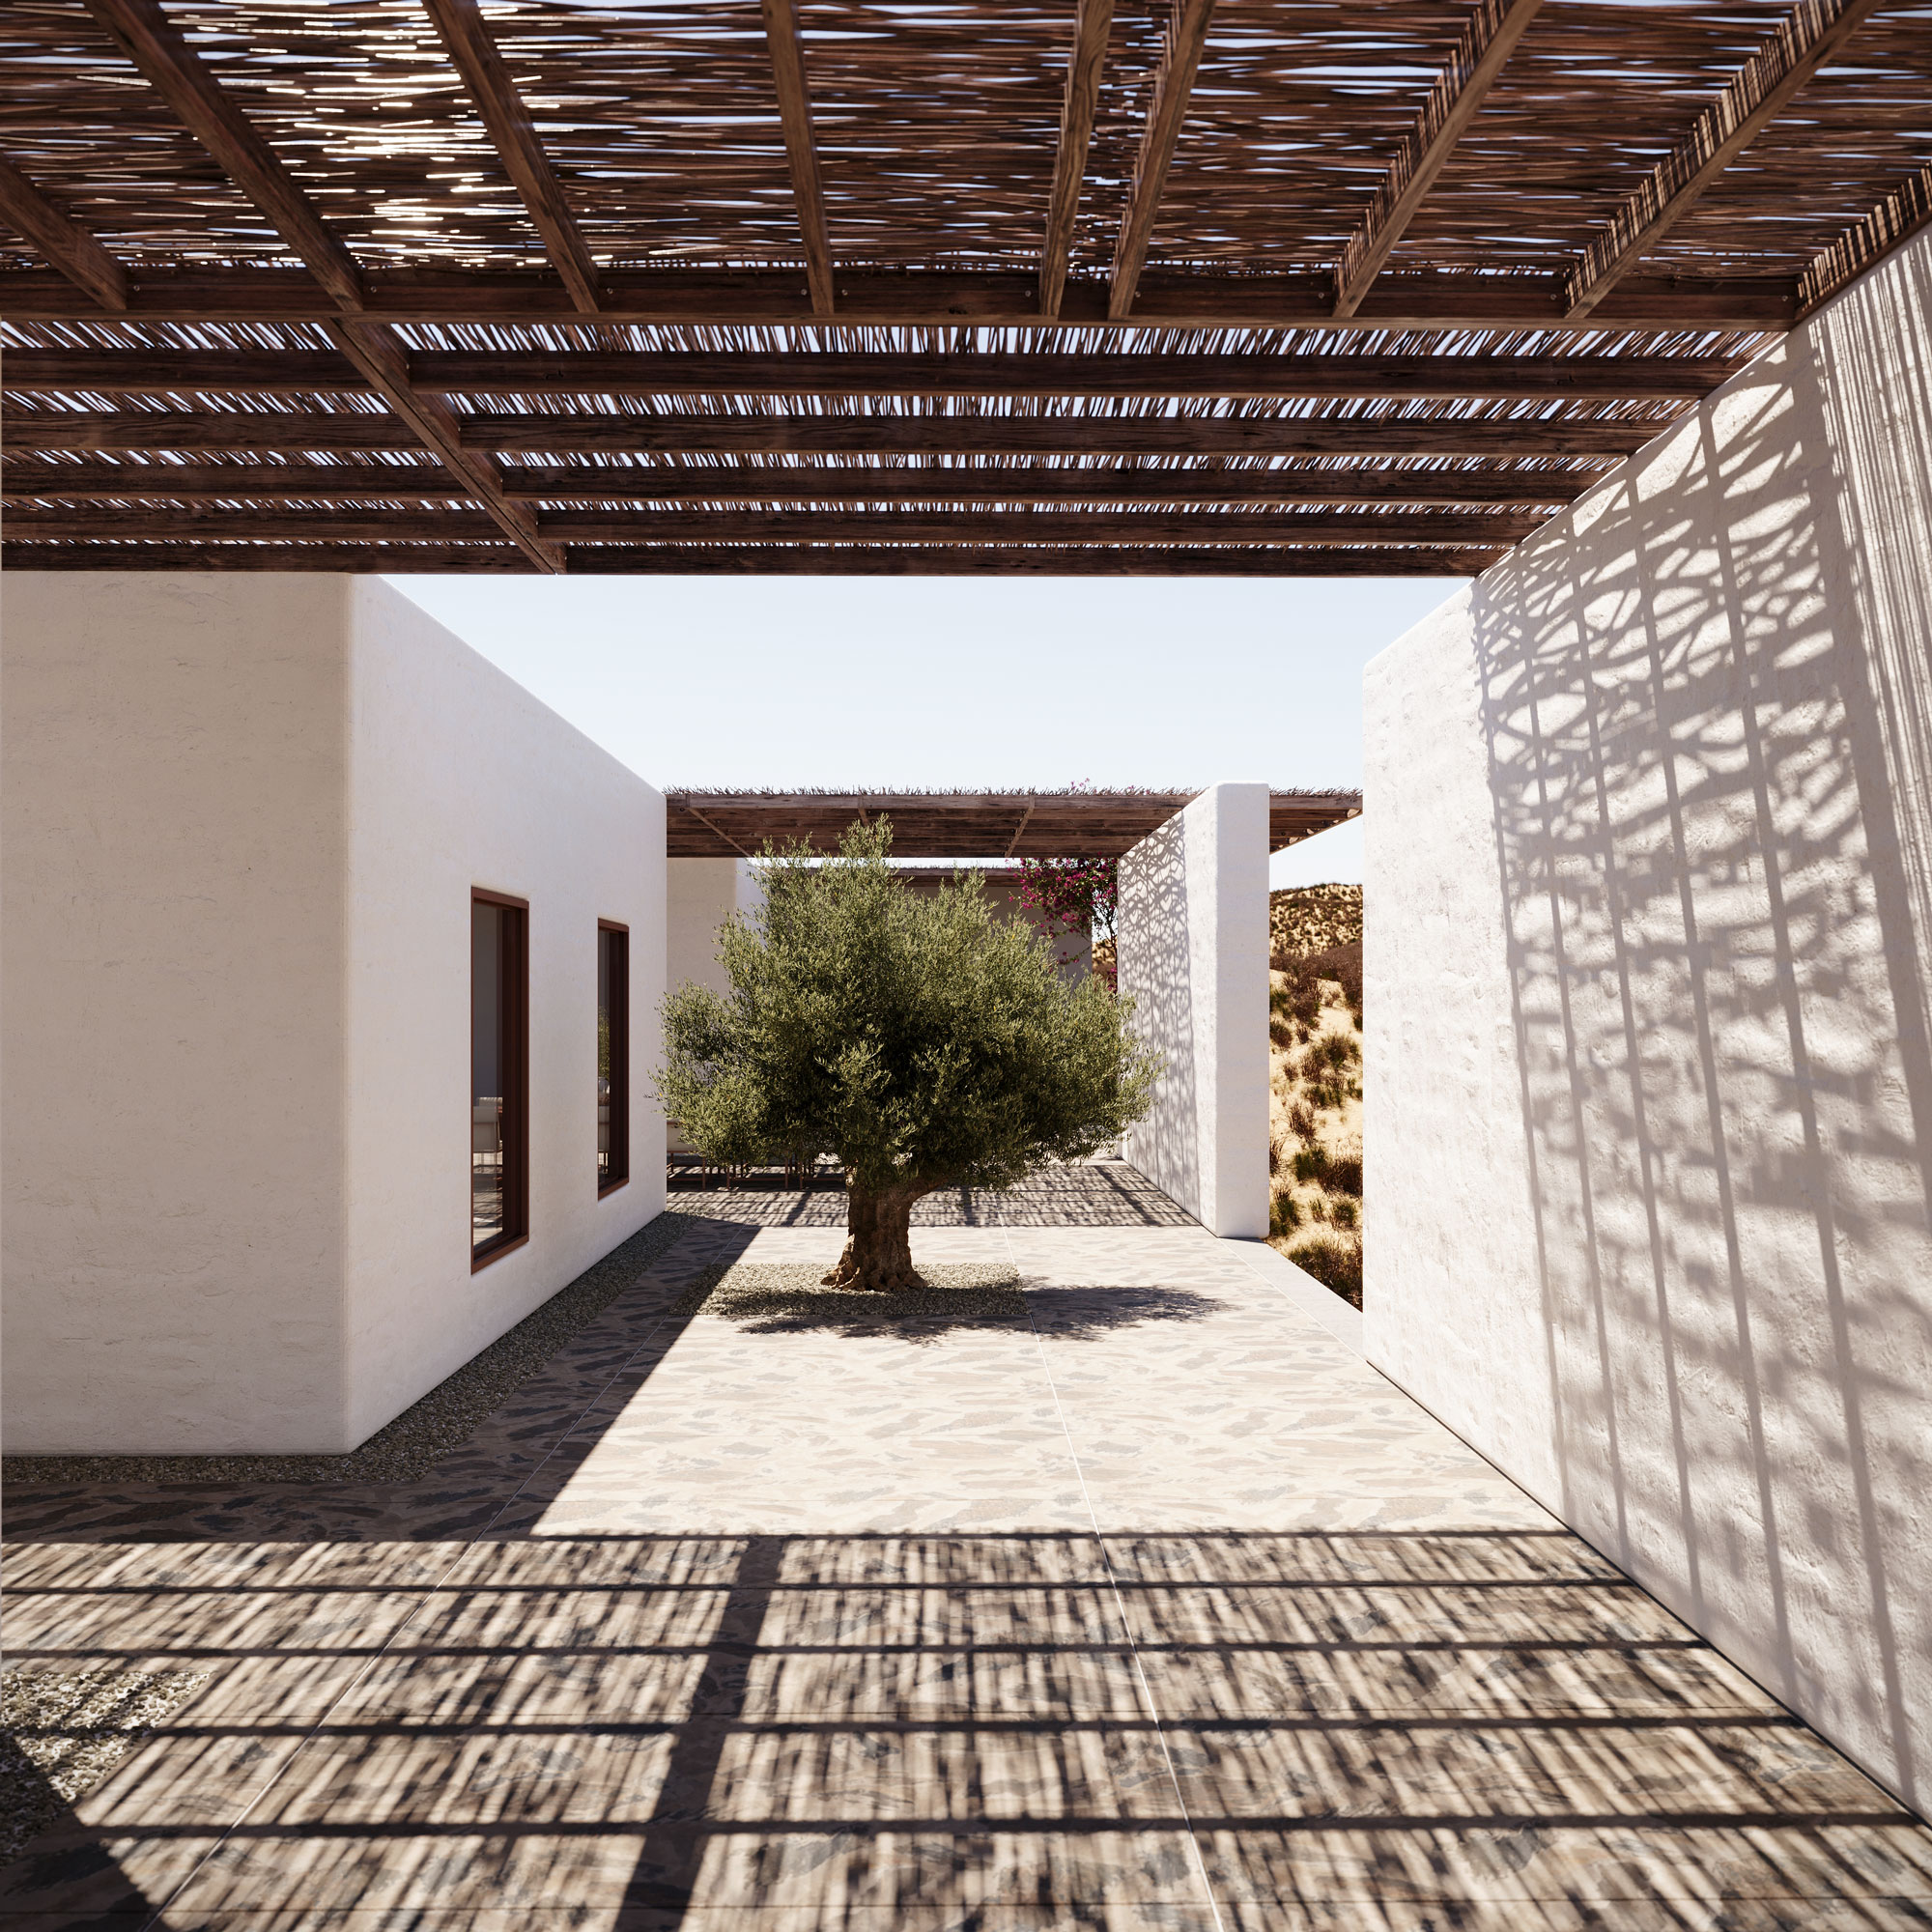 Greece Crete house render by YMAGES. Architect visualization and design.